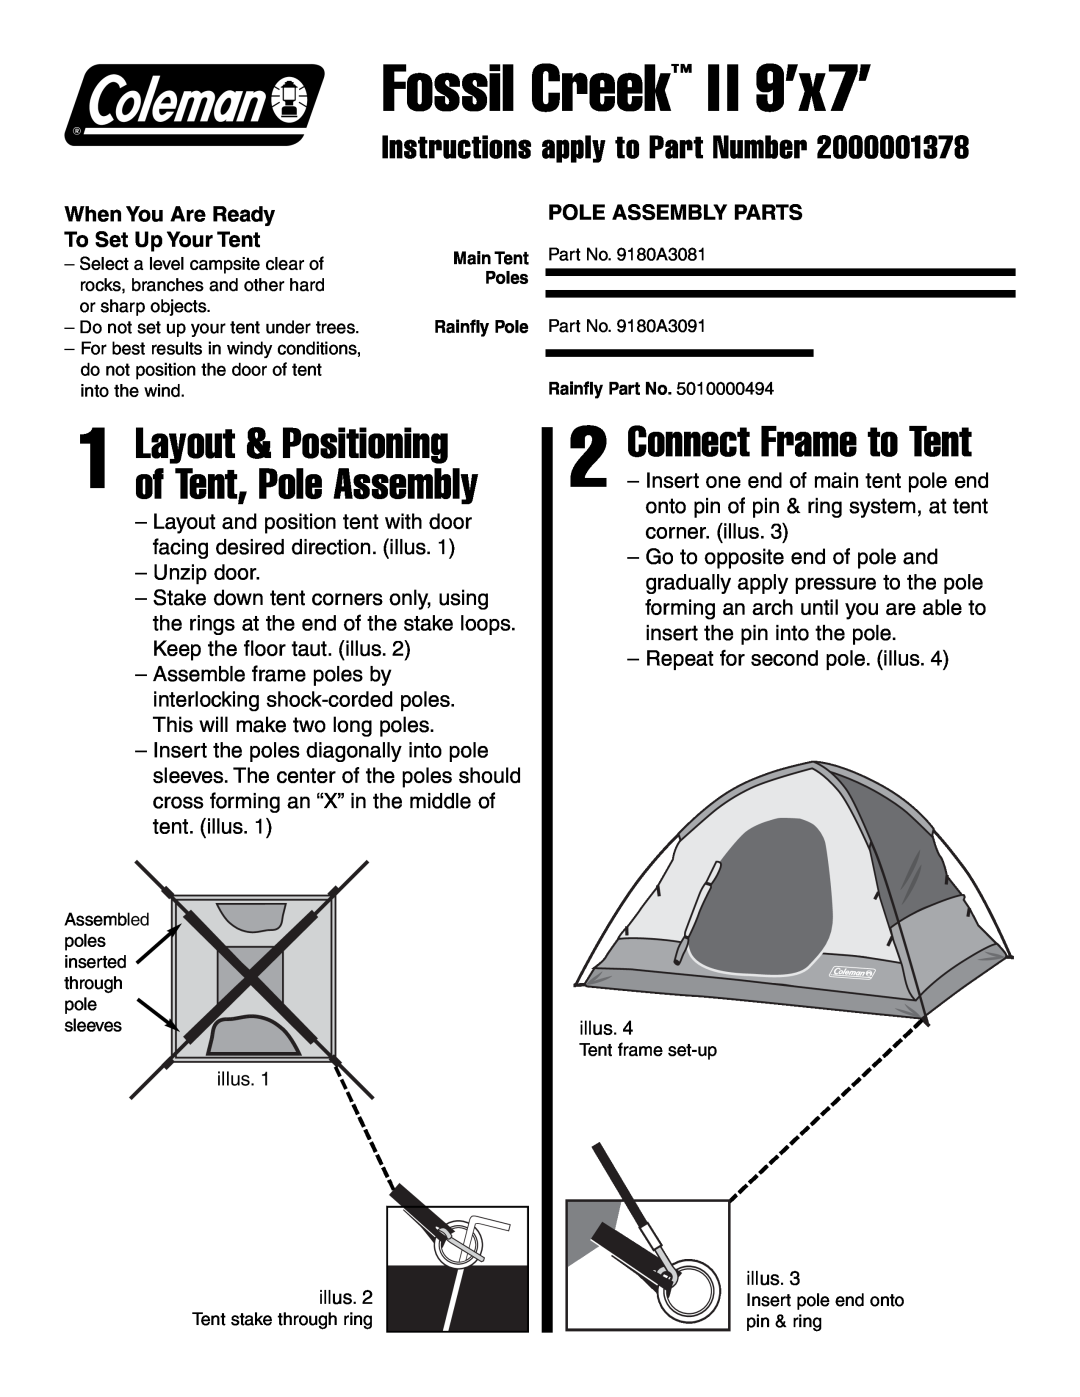 Coleman 9'x7 manual Connect Frame to Tent, Layout & Positioning of Tent, Pole Assembly, Pole Assembly Parts 